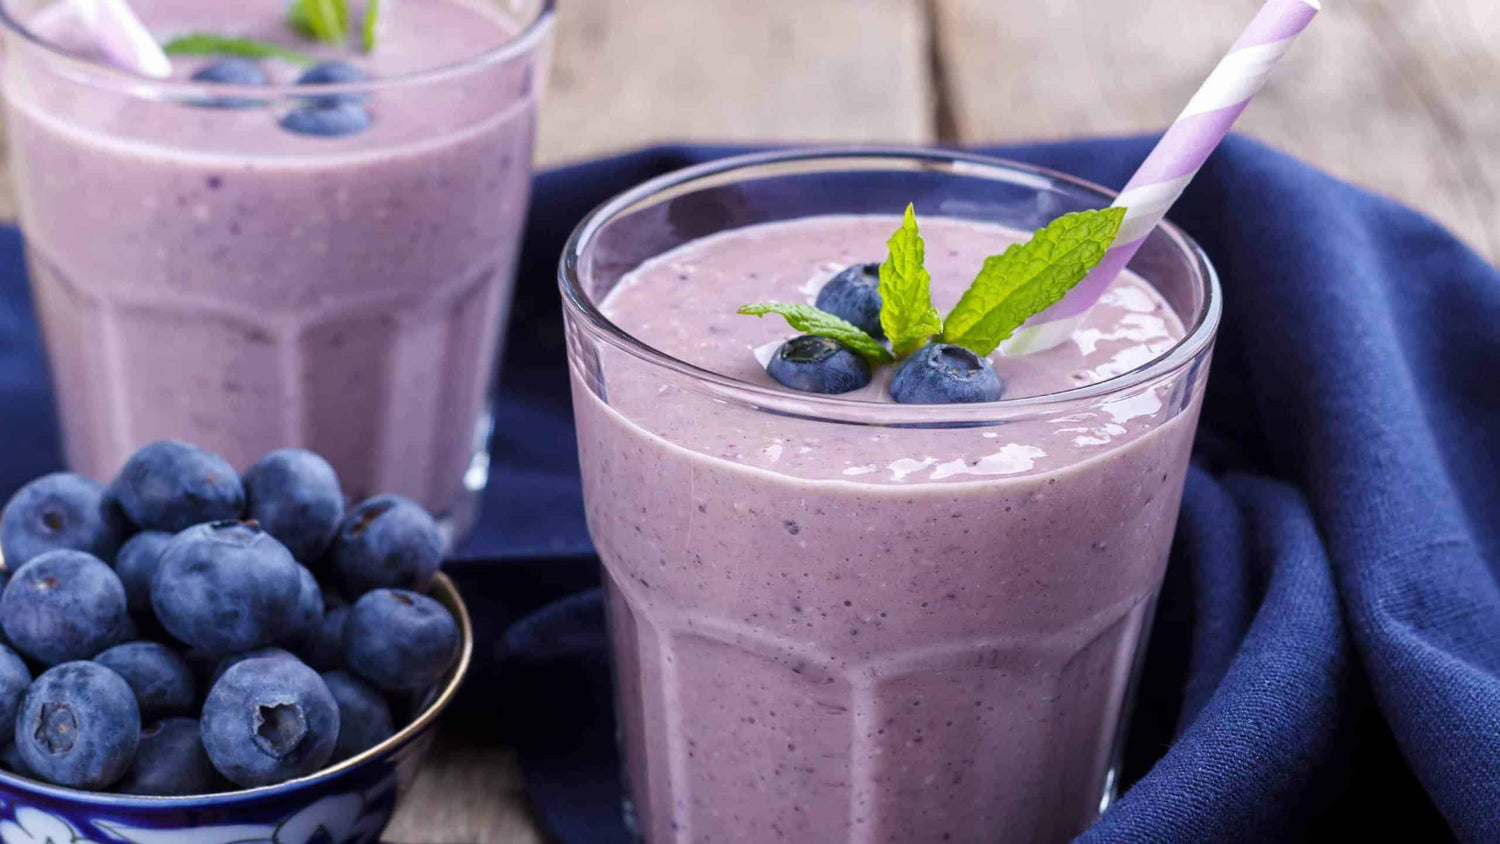 Photo of two glasses filled with purple smoothie and blueberries on the side